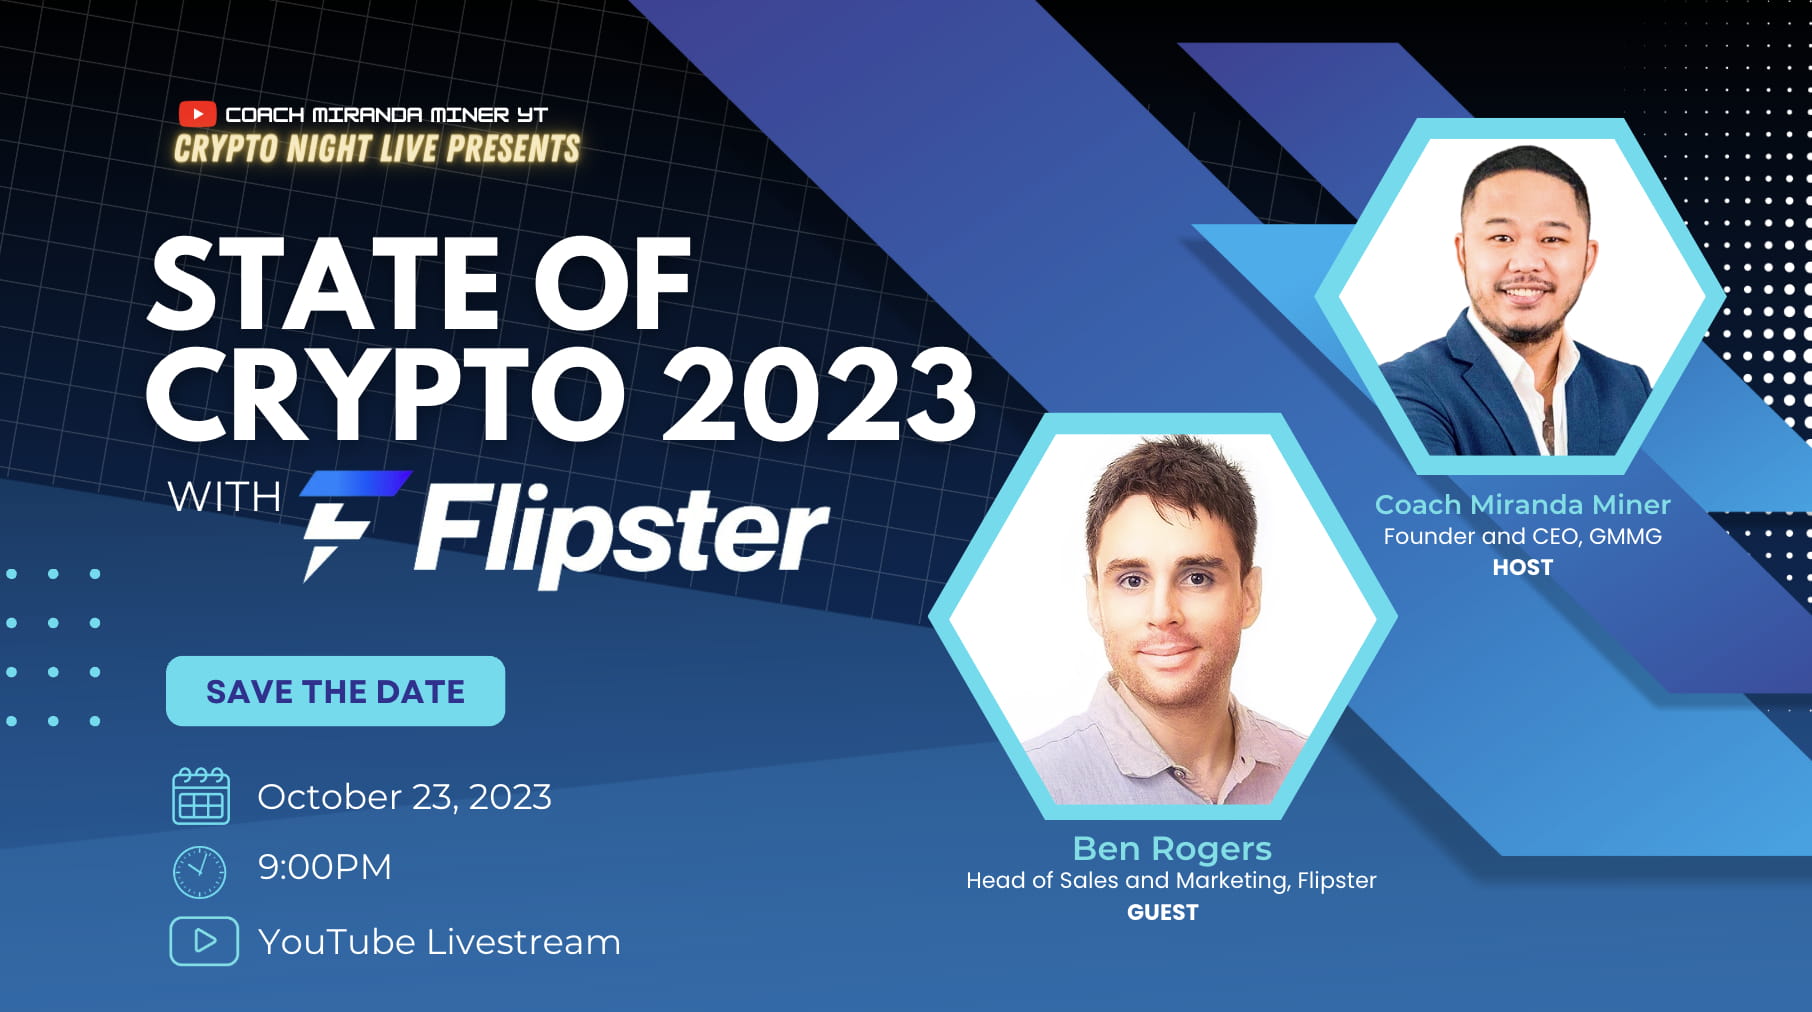 Flipster's Executive provide insights on current Crypto Landscape